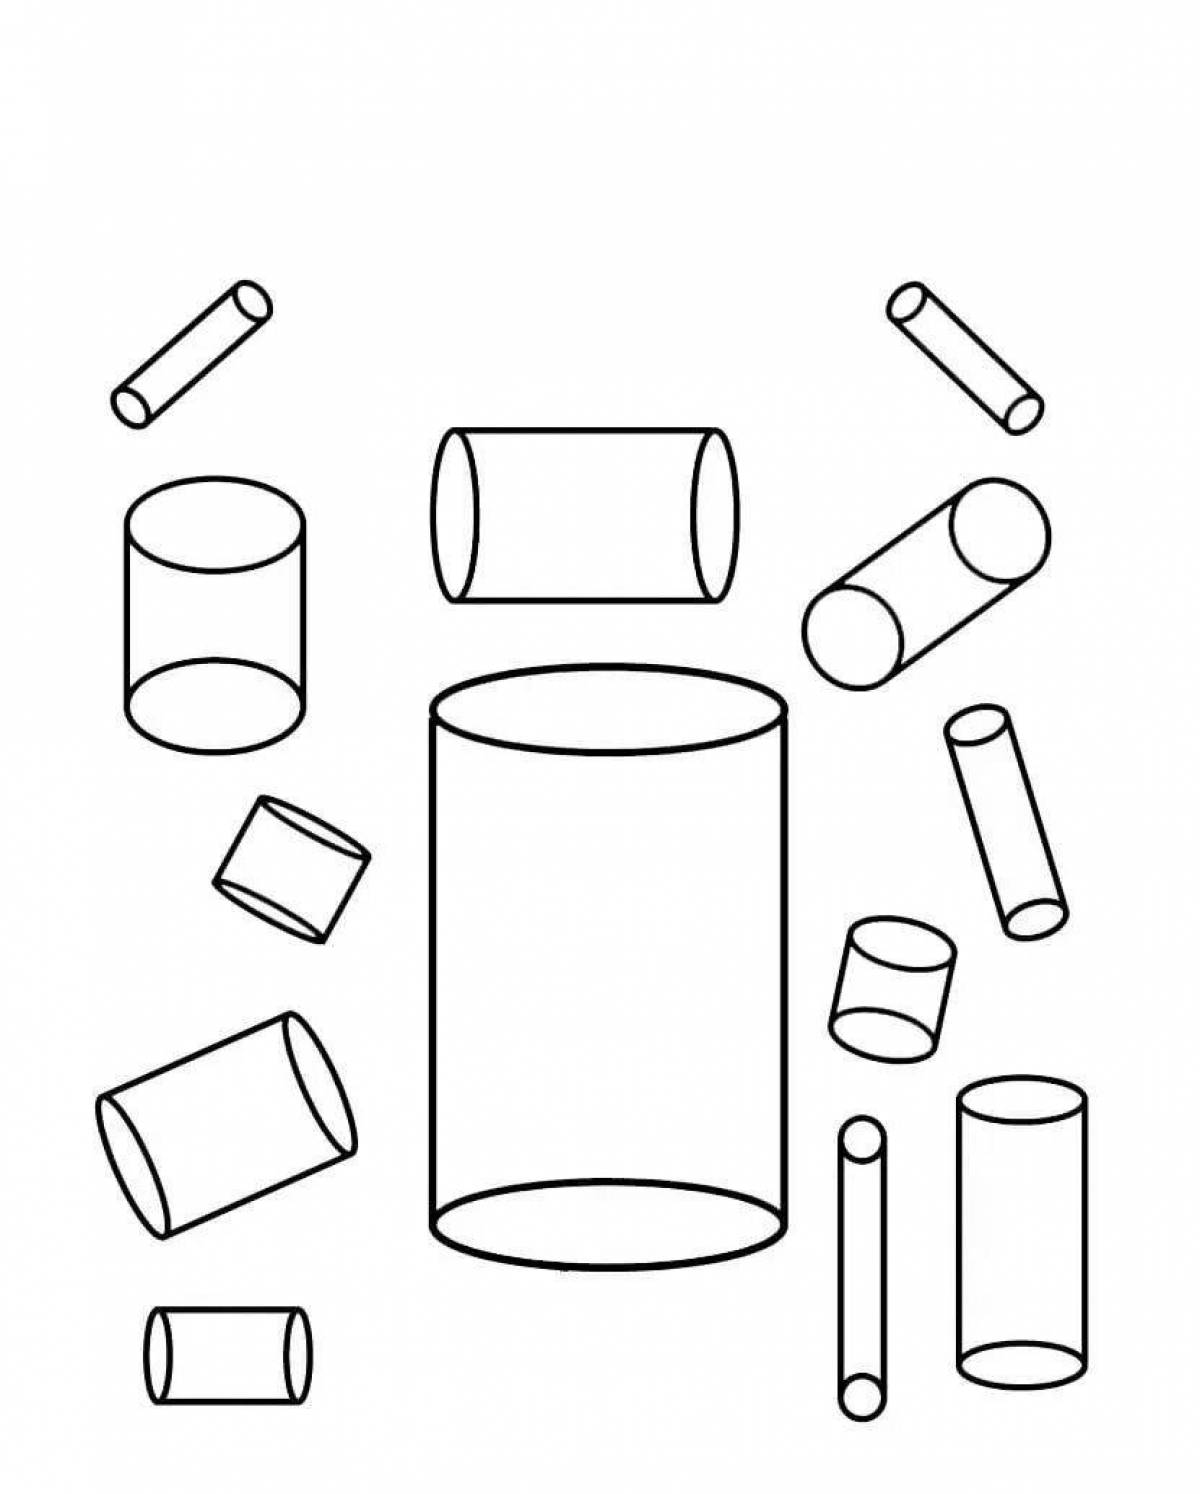 Cylinder coloring page